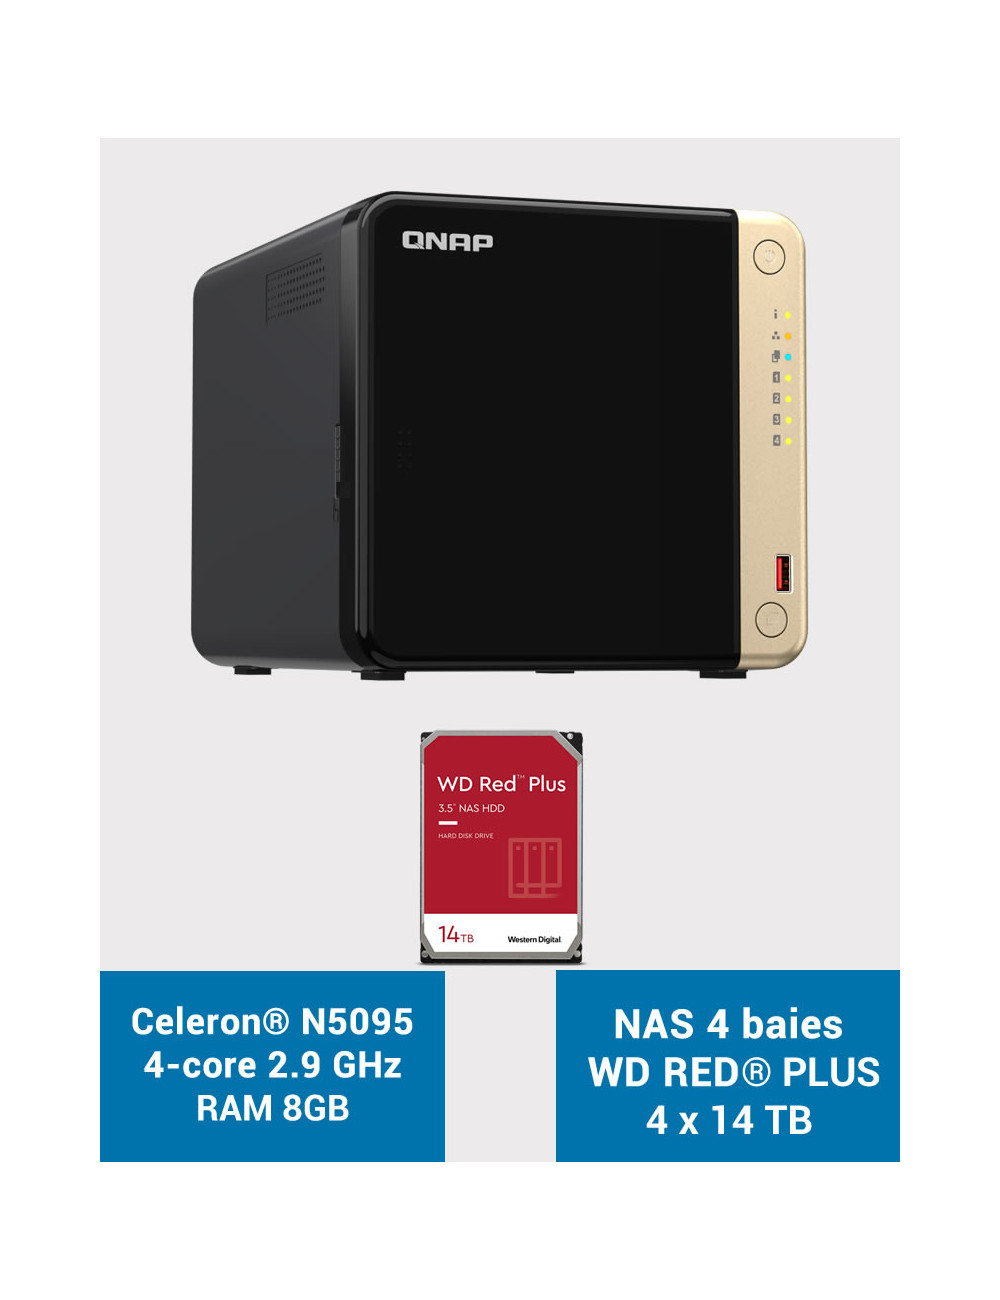 QNAP TS-464 8GB Serveur NAS 4 baies WD RED PLUS 56To (4x14To)